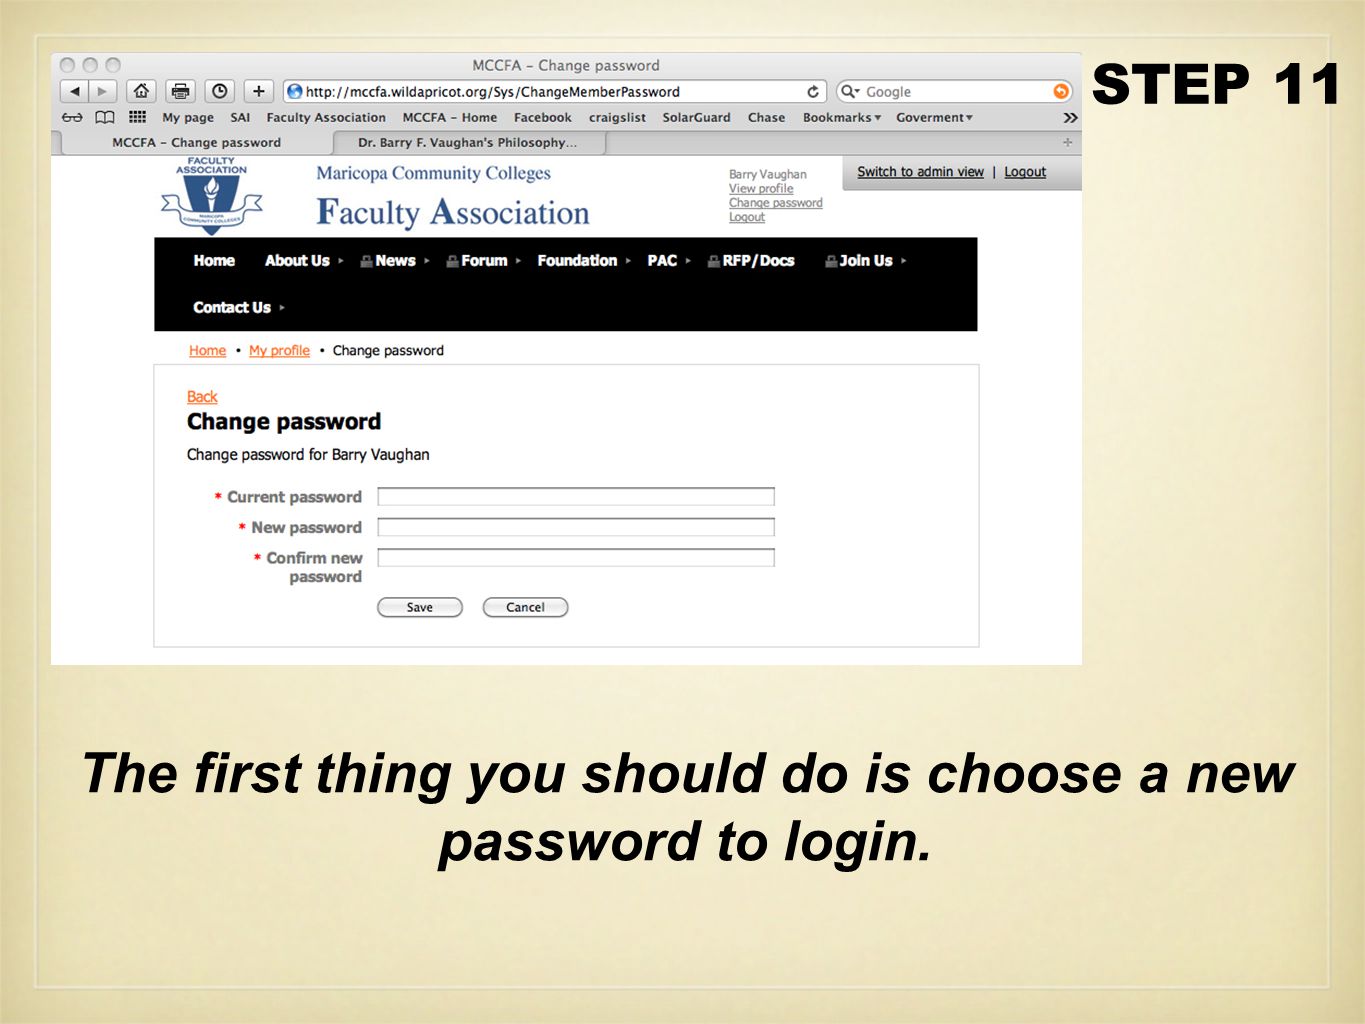 STEP 11 The first thing you should do is choose a new password to login.